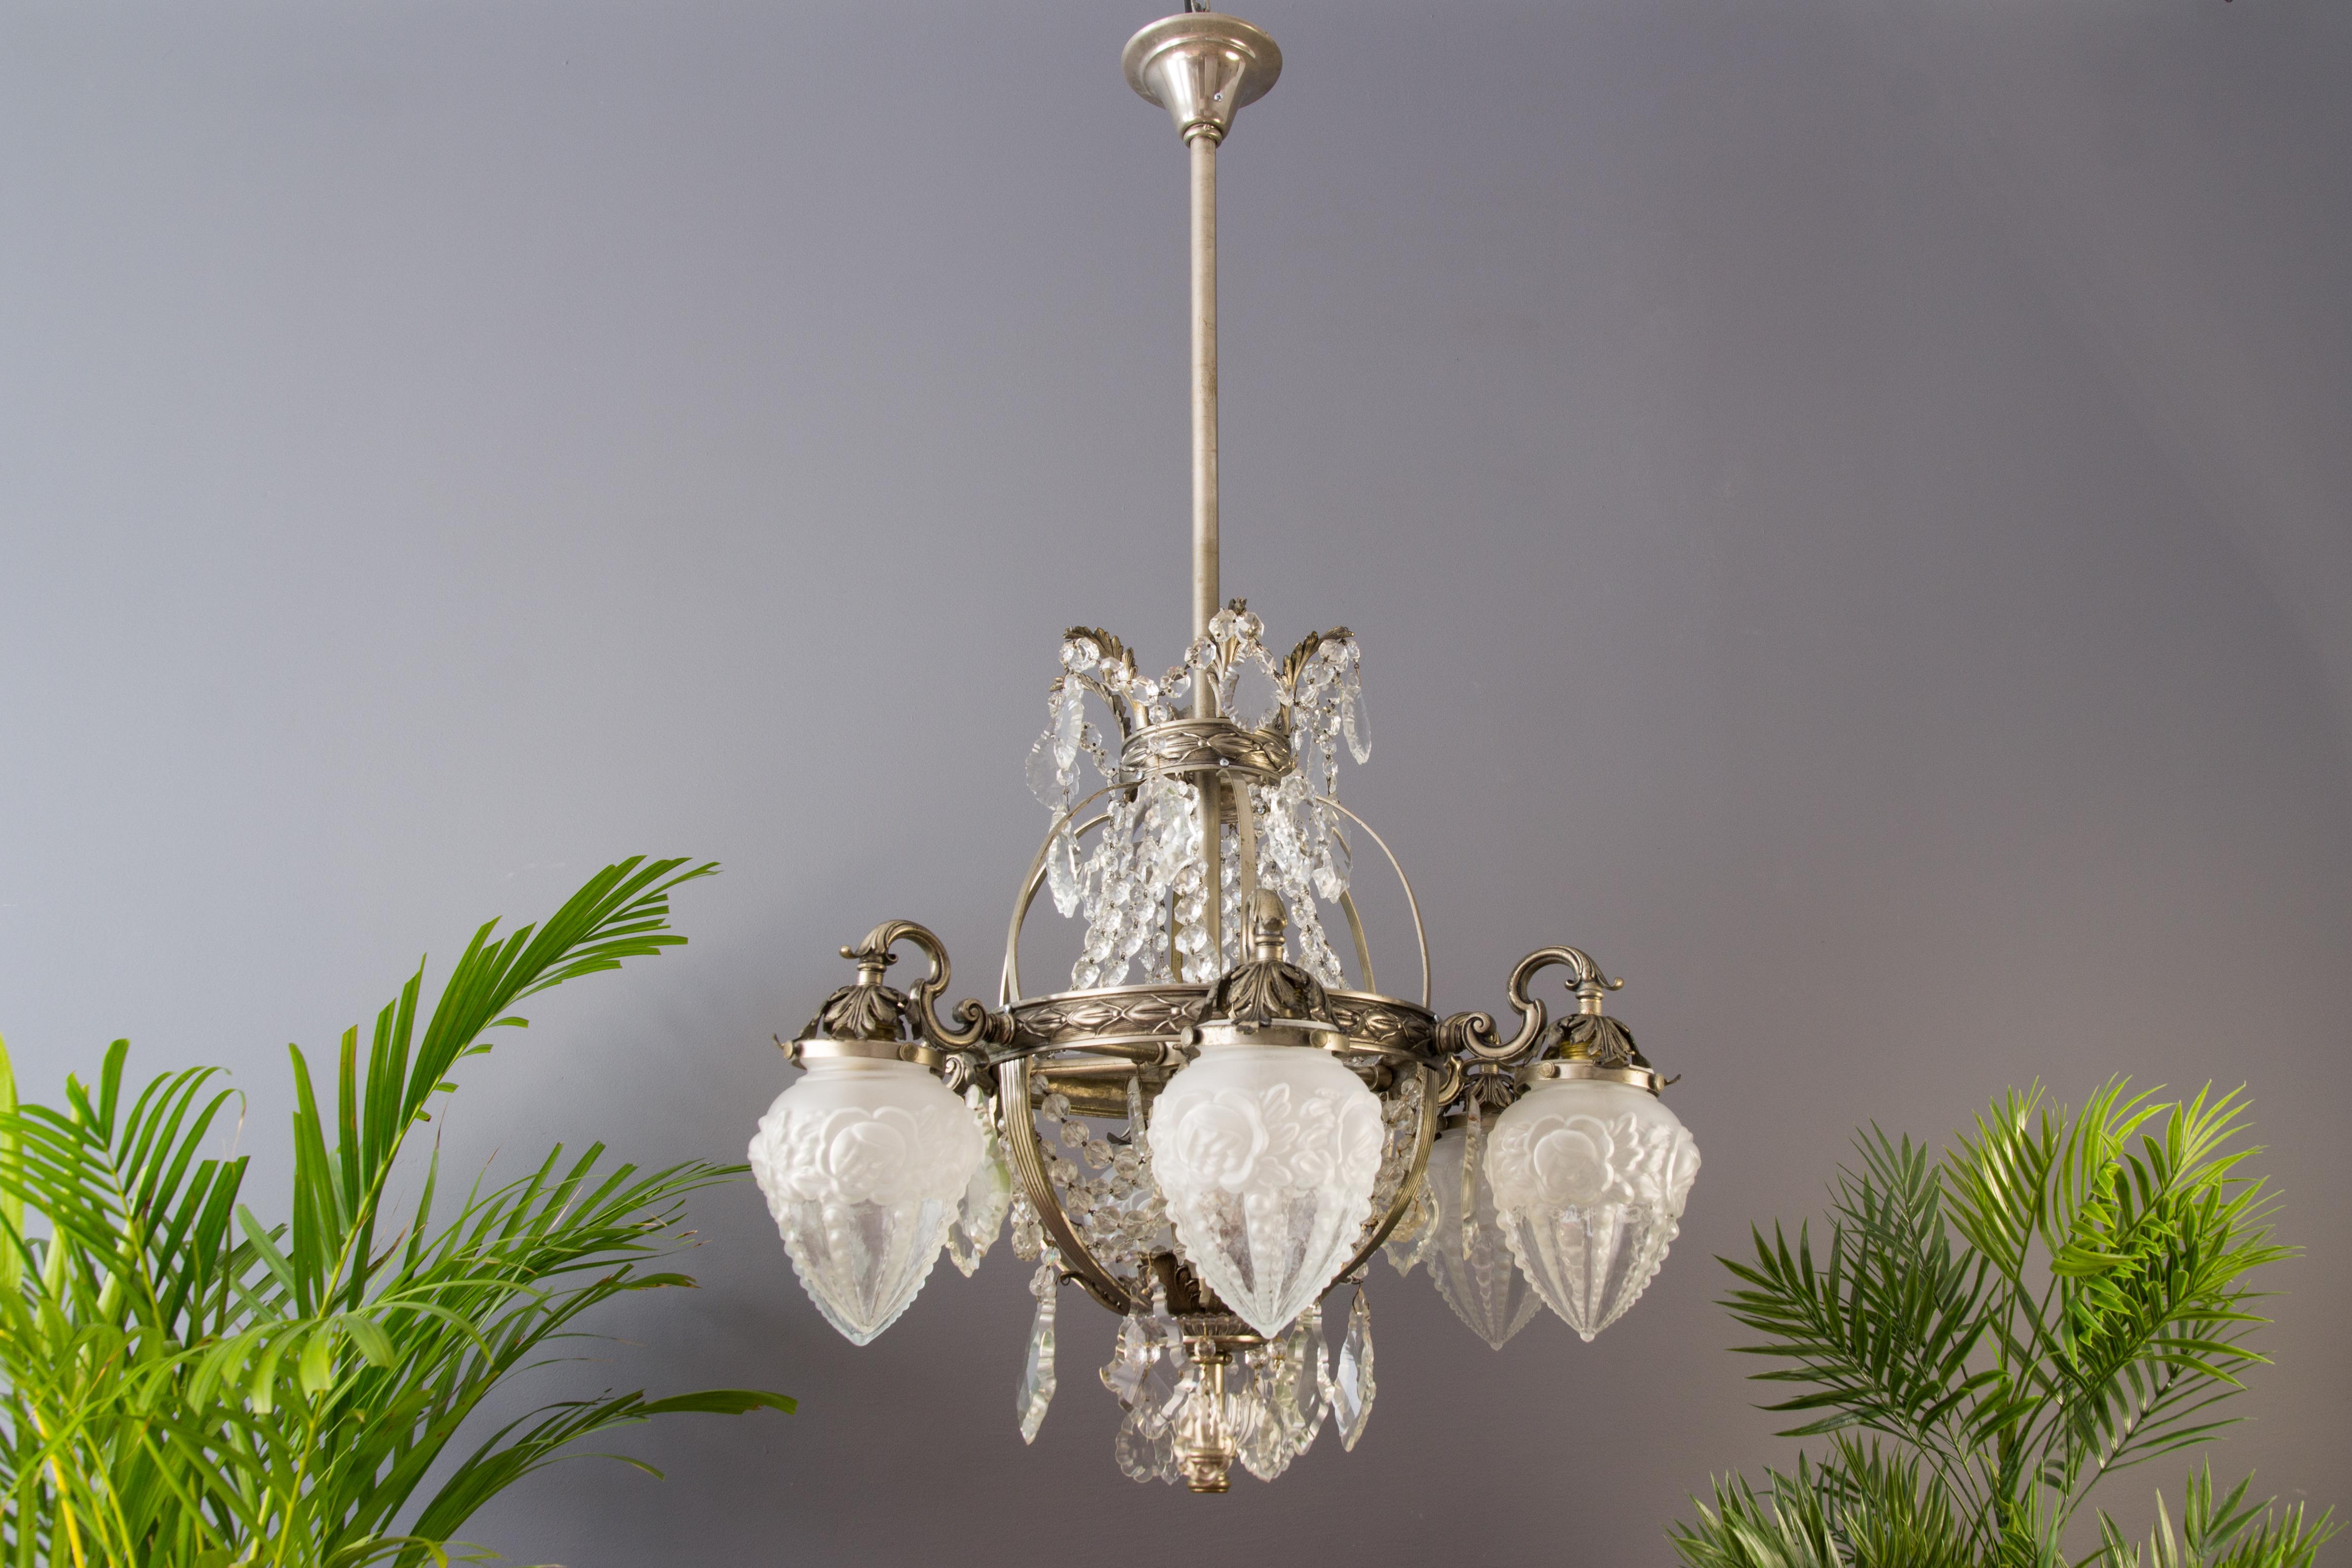 French Art Deco six-light bronze and crystal chandelier
Impressive French Art Deco silver color bronze chandelier with beautiful foliate details, decorated with crystal beaded chains and multifaceted and shaped crystal drops / prisms.
Six bronze